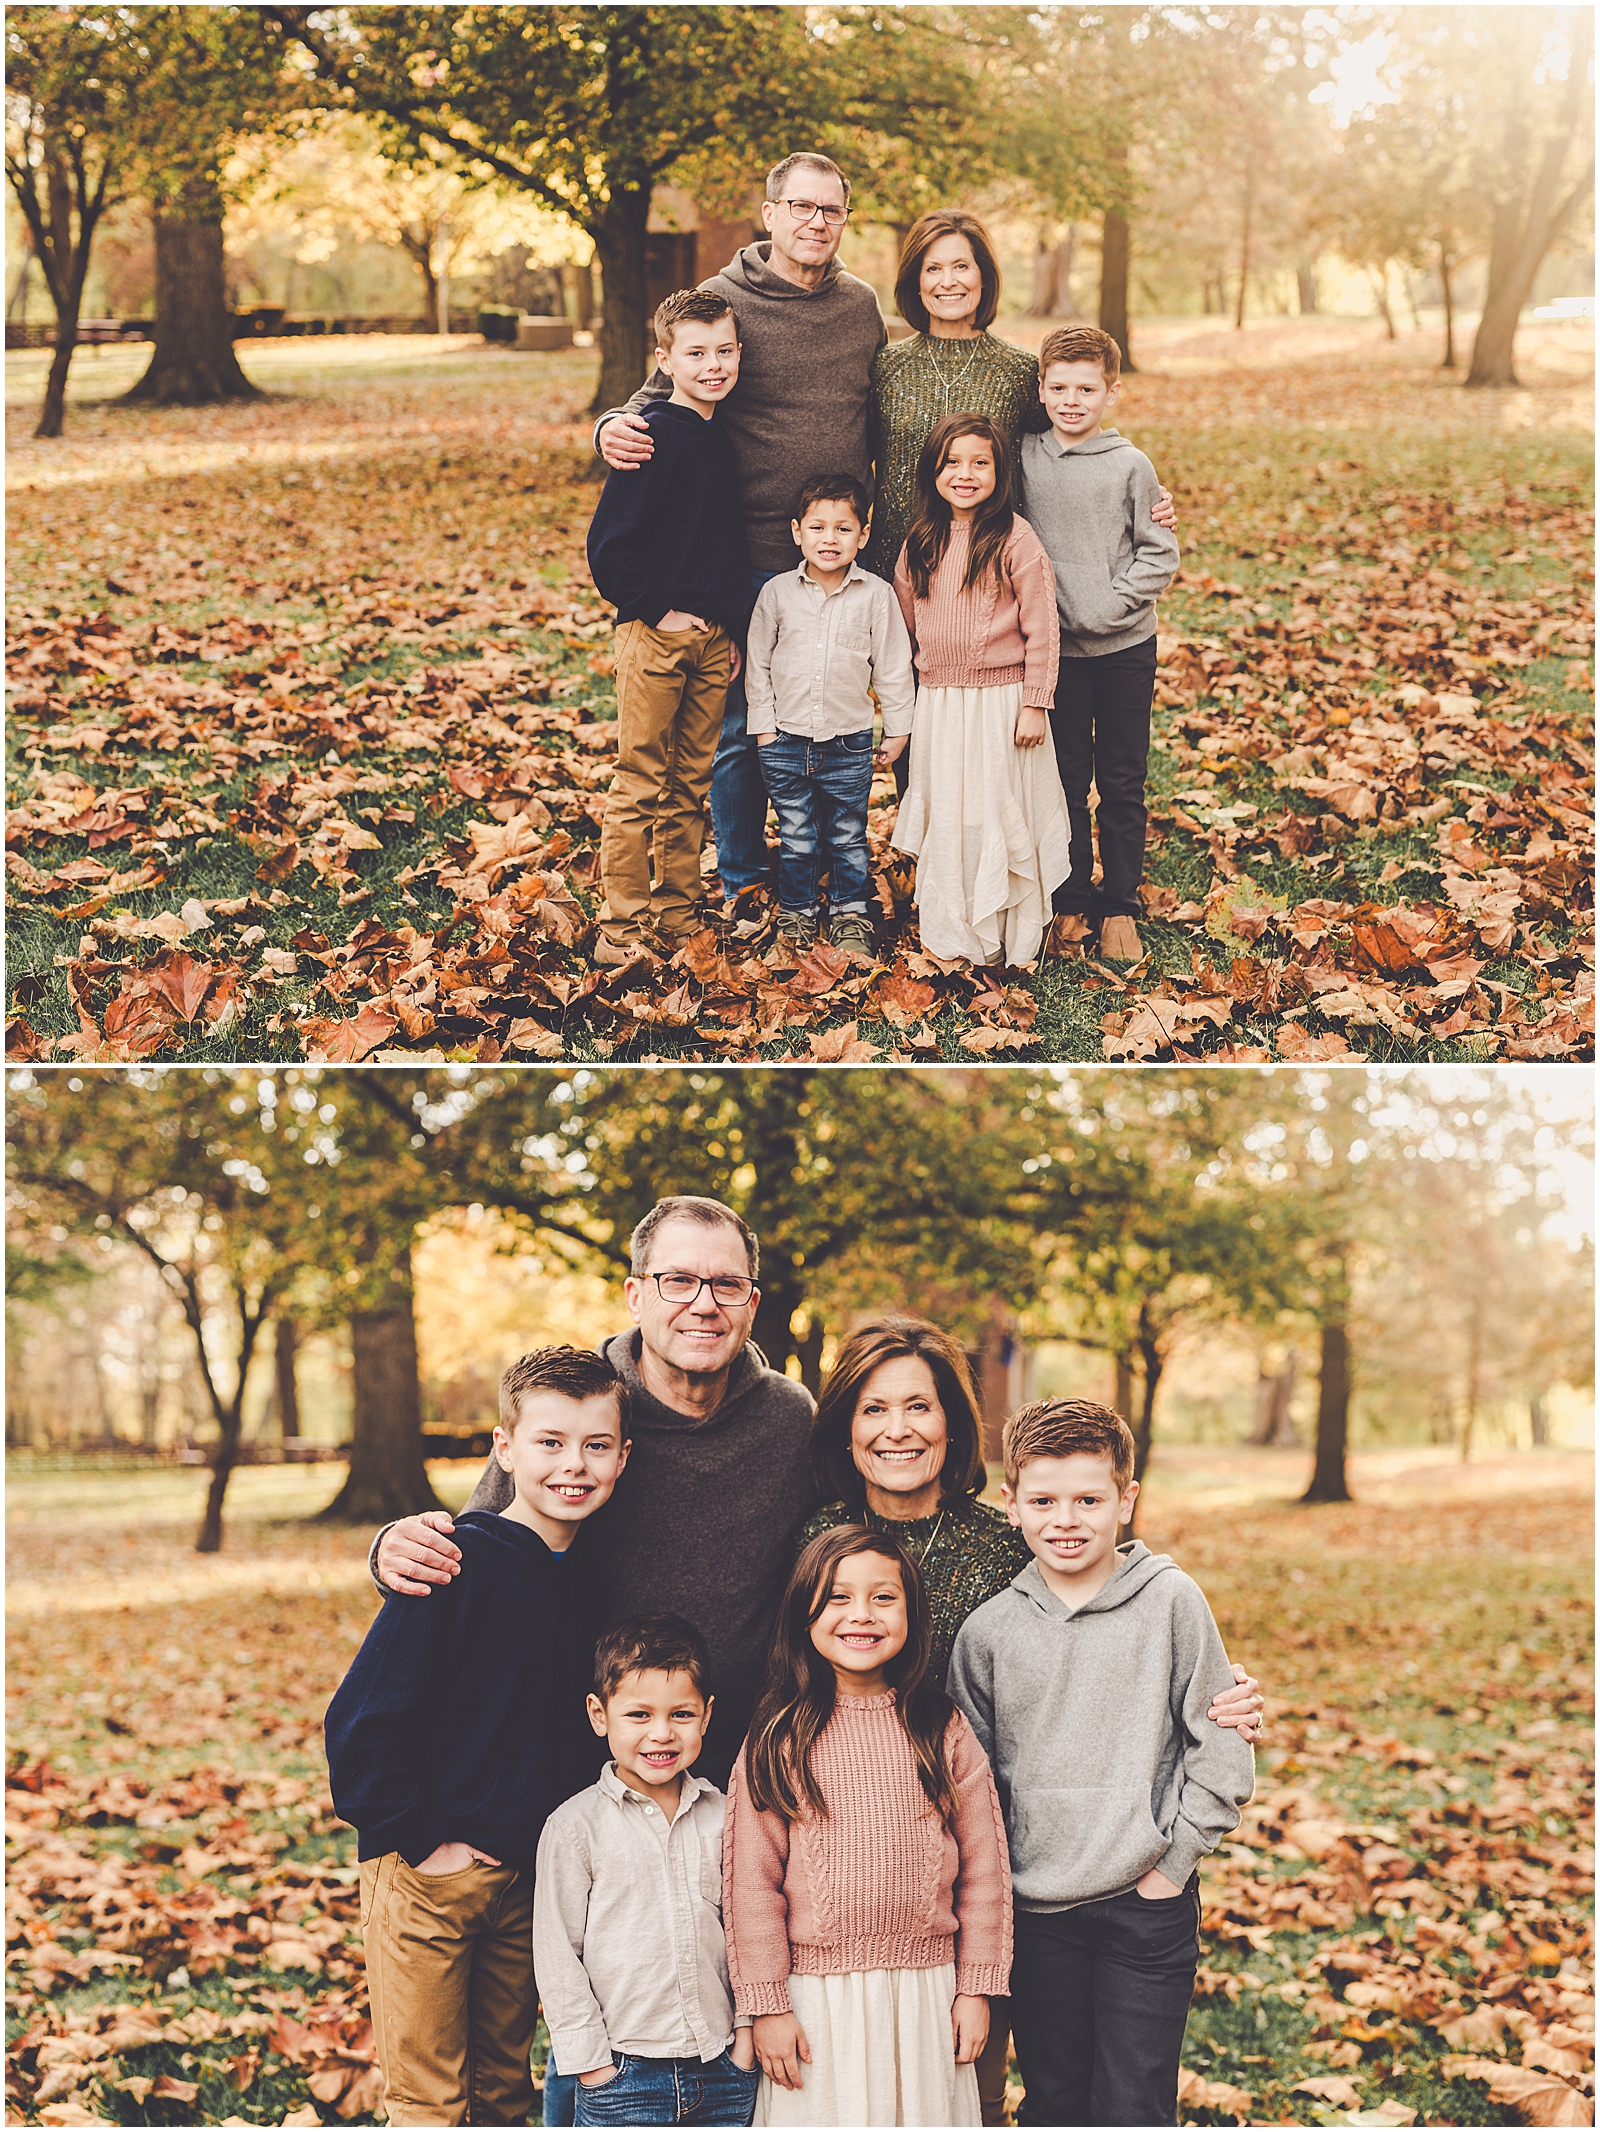 Iroquois County family photographer in Watseka for the Knapp family with Kankakee County family photographer Kara Evans Photographer.